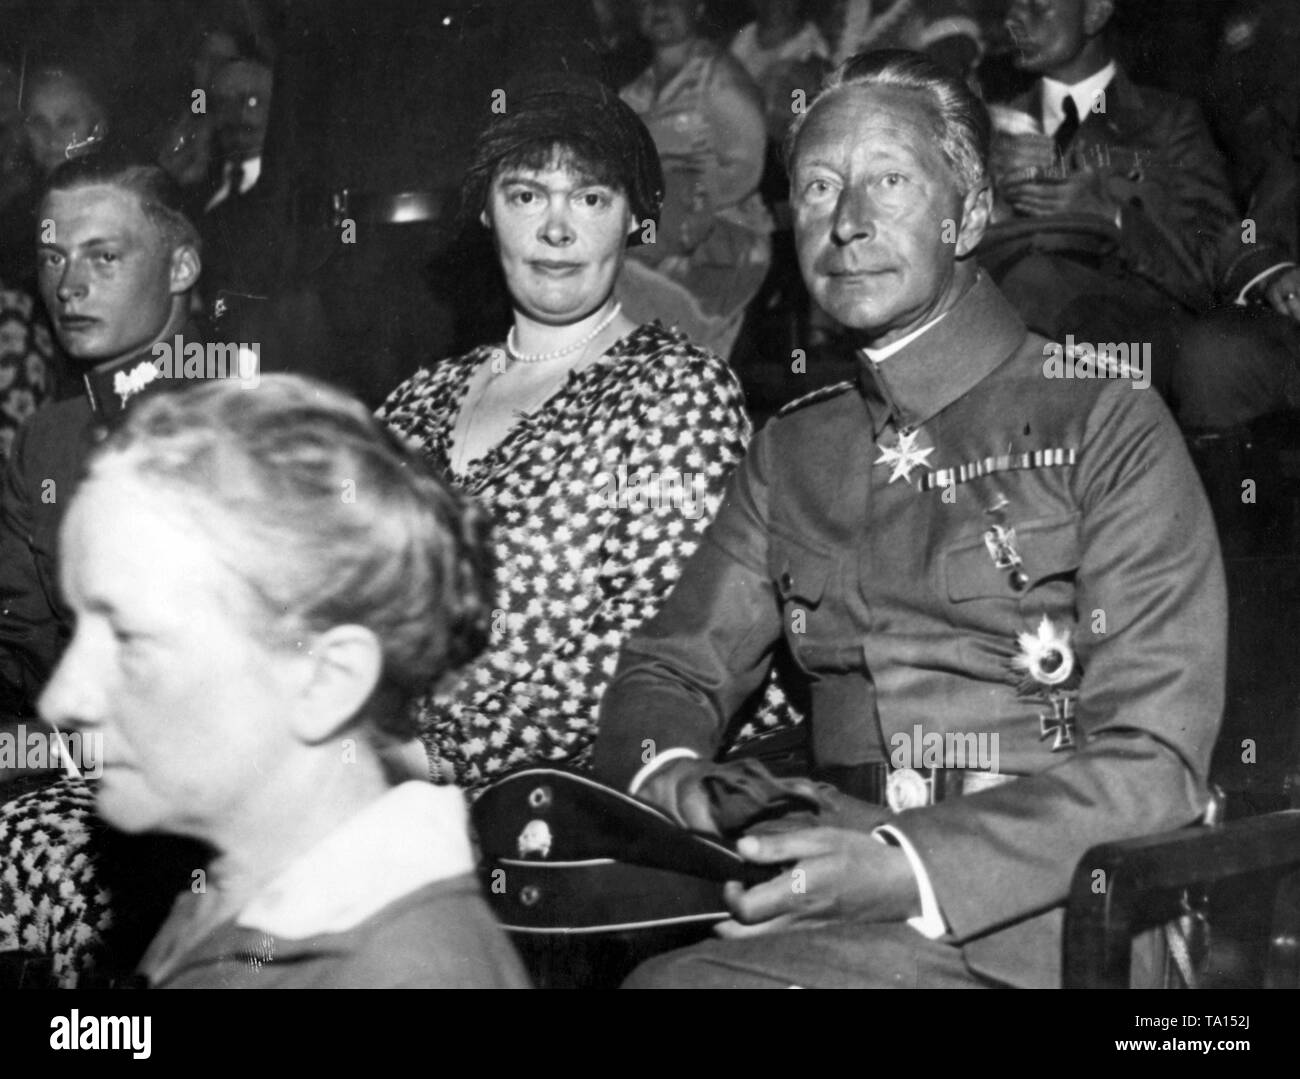 From left: Prince Wilhelm of Prussia, his mother Crown Princess Cecilie and his father Crown Prince Wilhelm of Prussia at a political event. Stock Photo